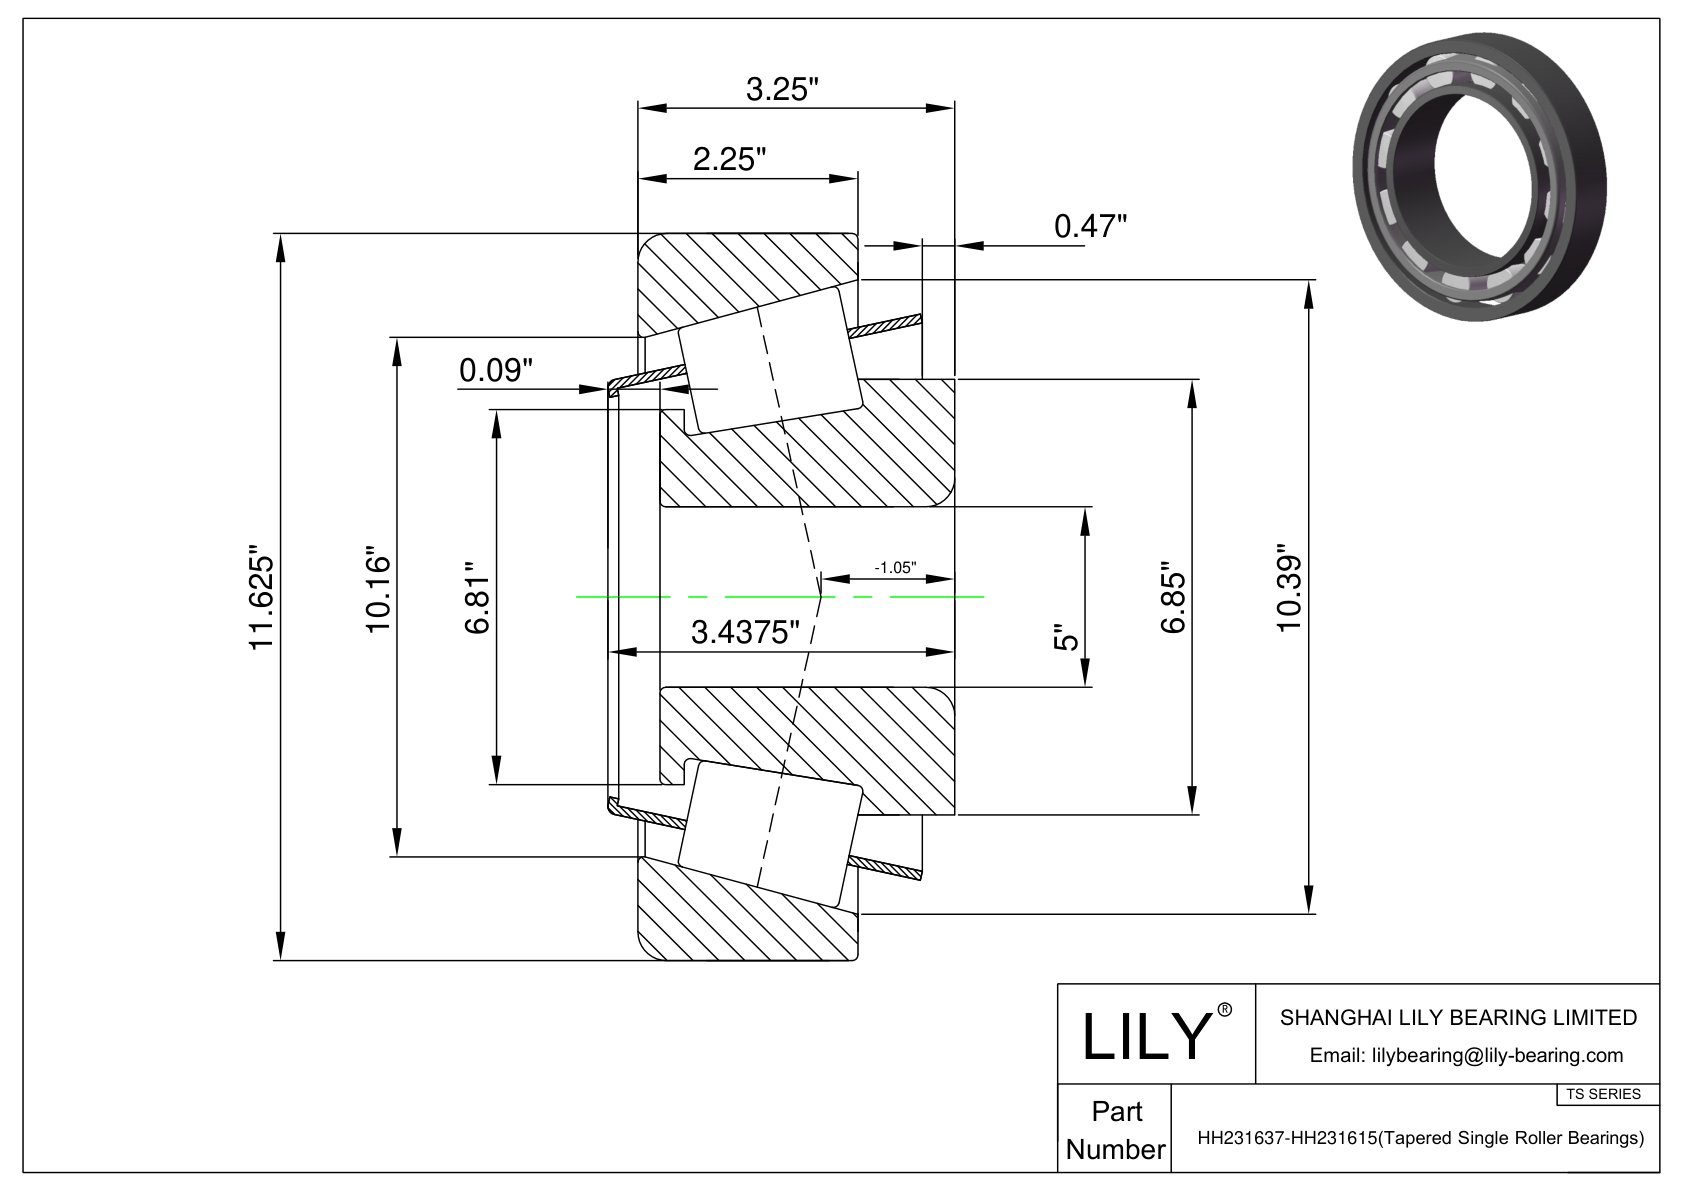 HH231637-HH231615 TS (Tapered Single Roller Bearings) (Imperial) cad drawing